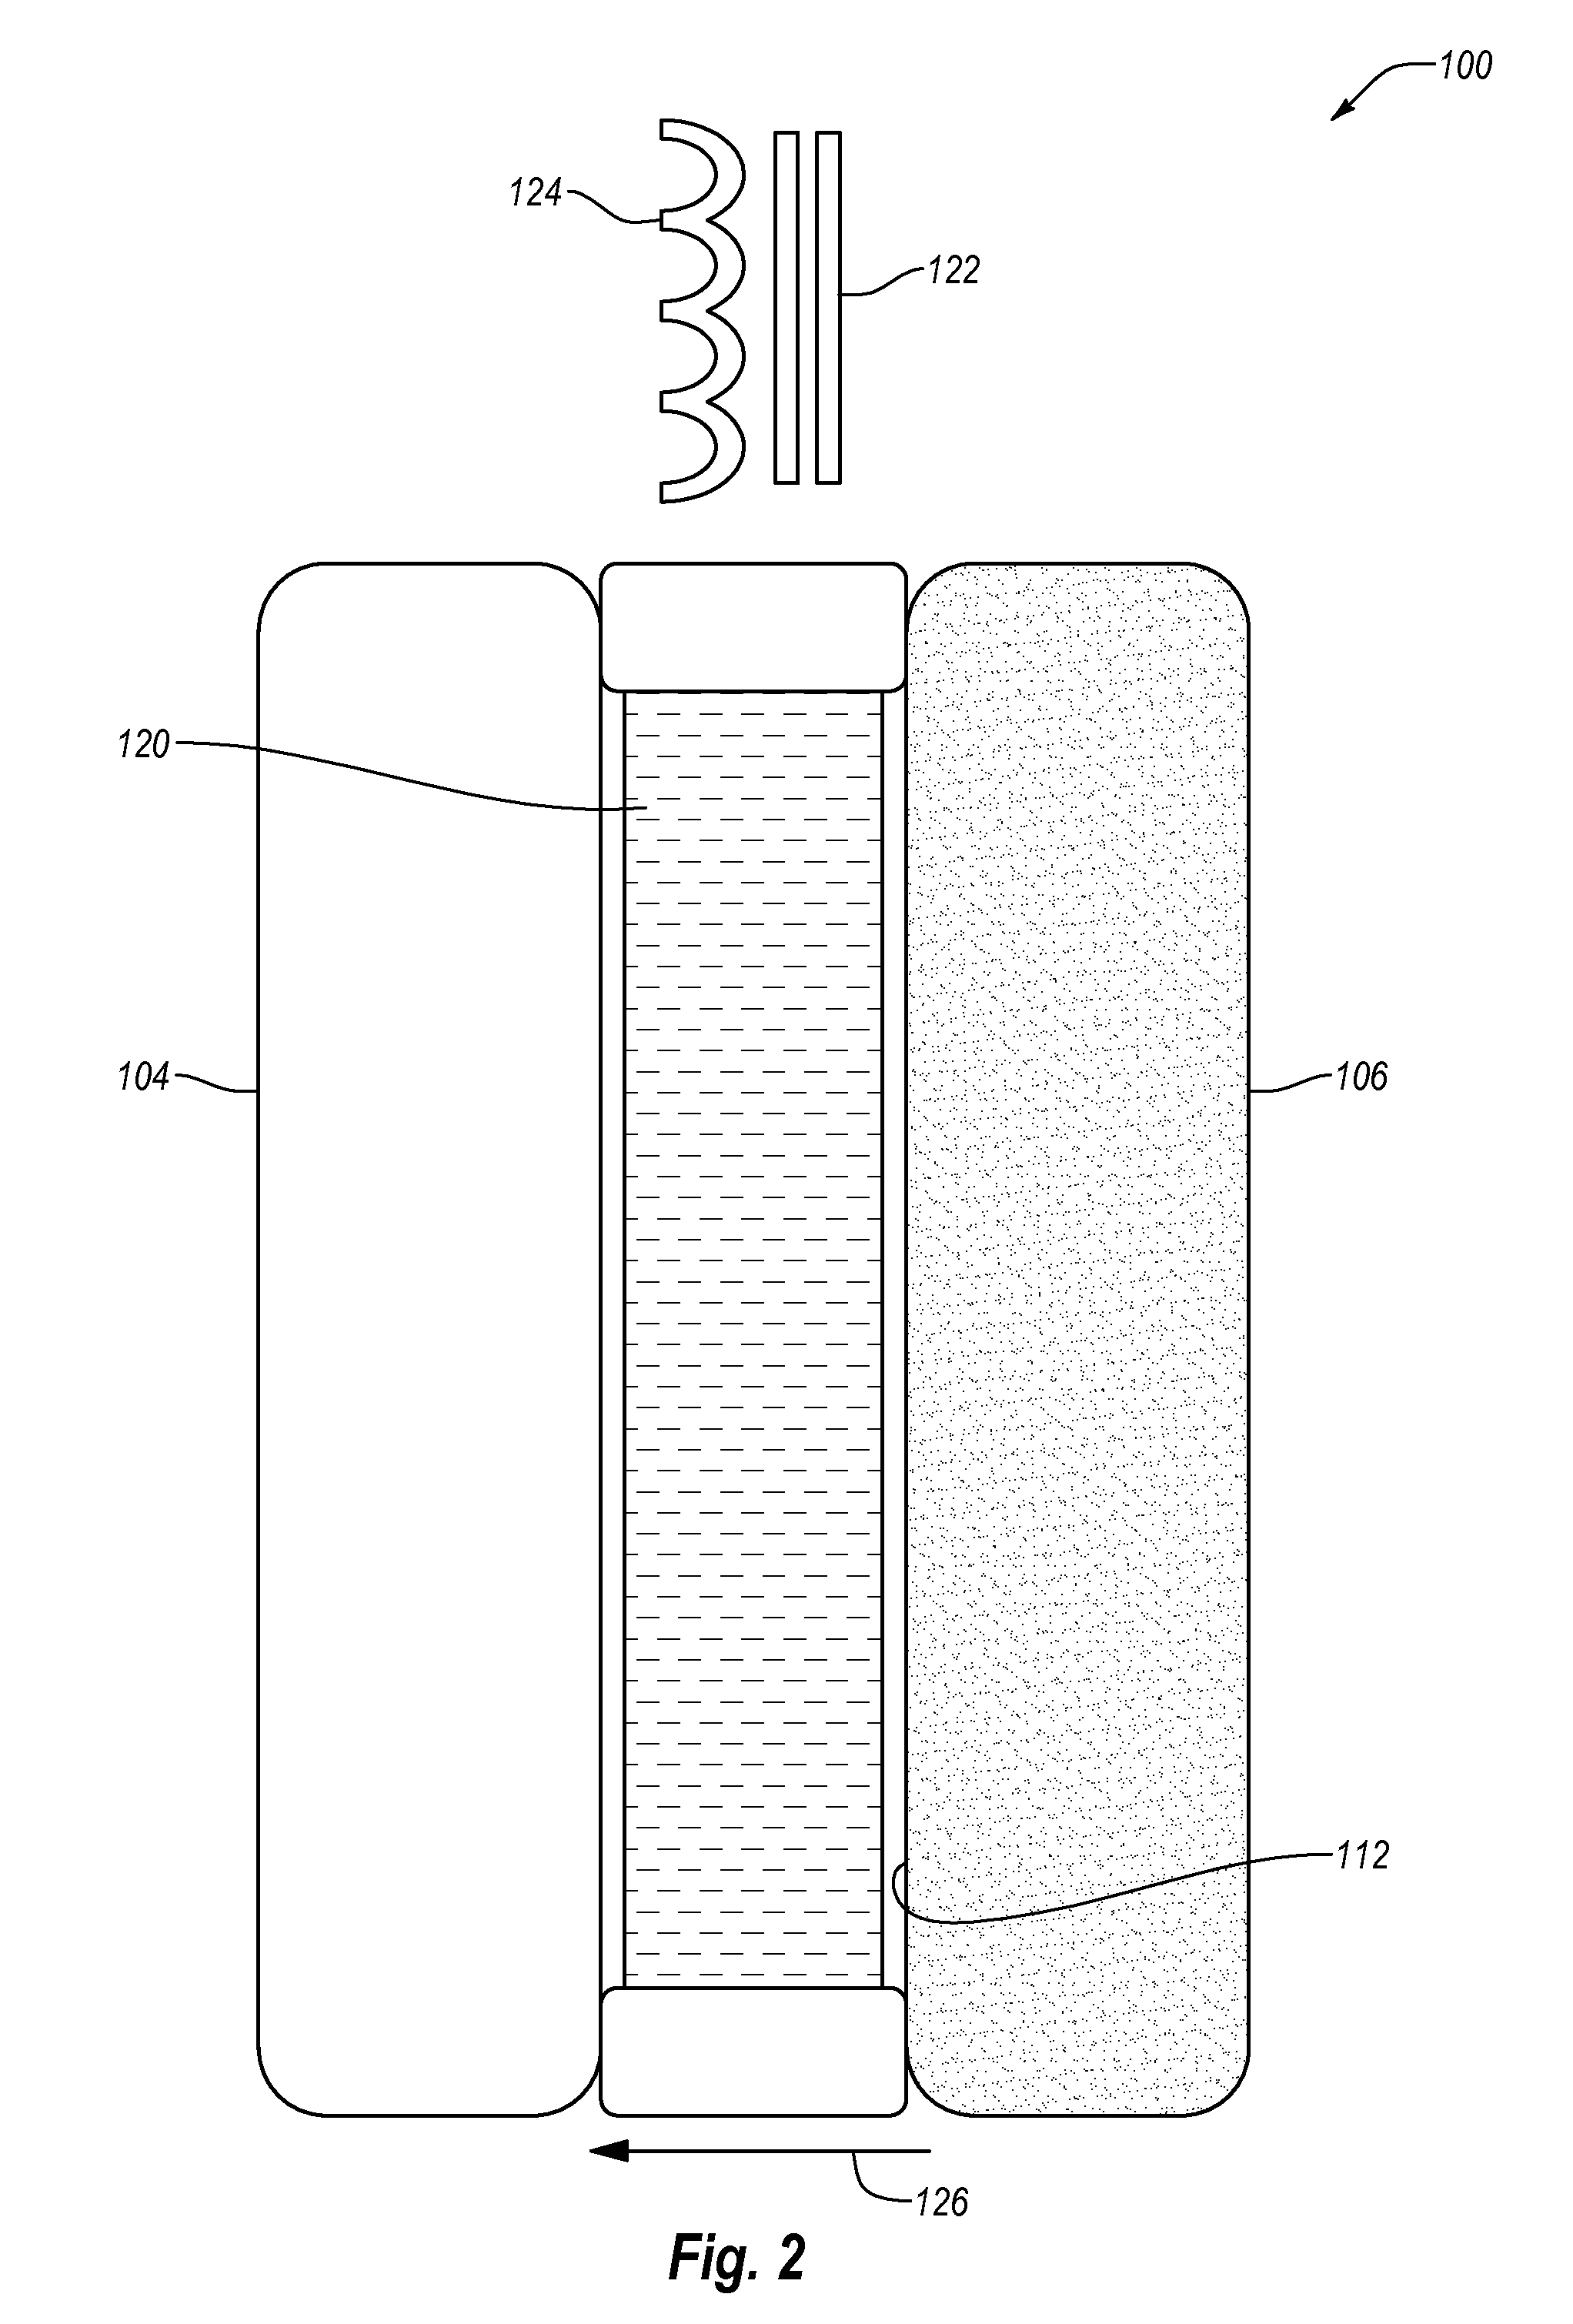 Systems, apparatuses, and methods for extracting non-polar lipids from an aqueous algae slurry and lipids produced therefrom